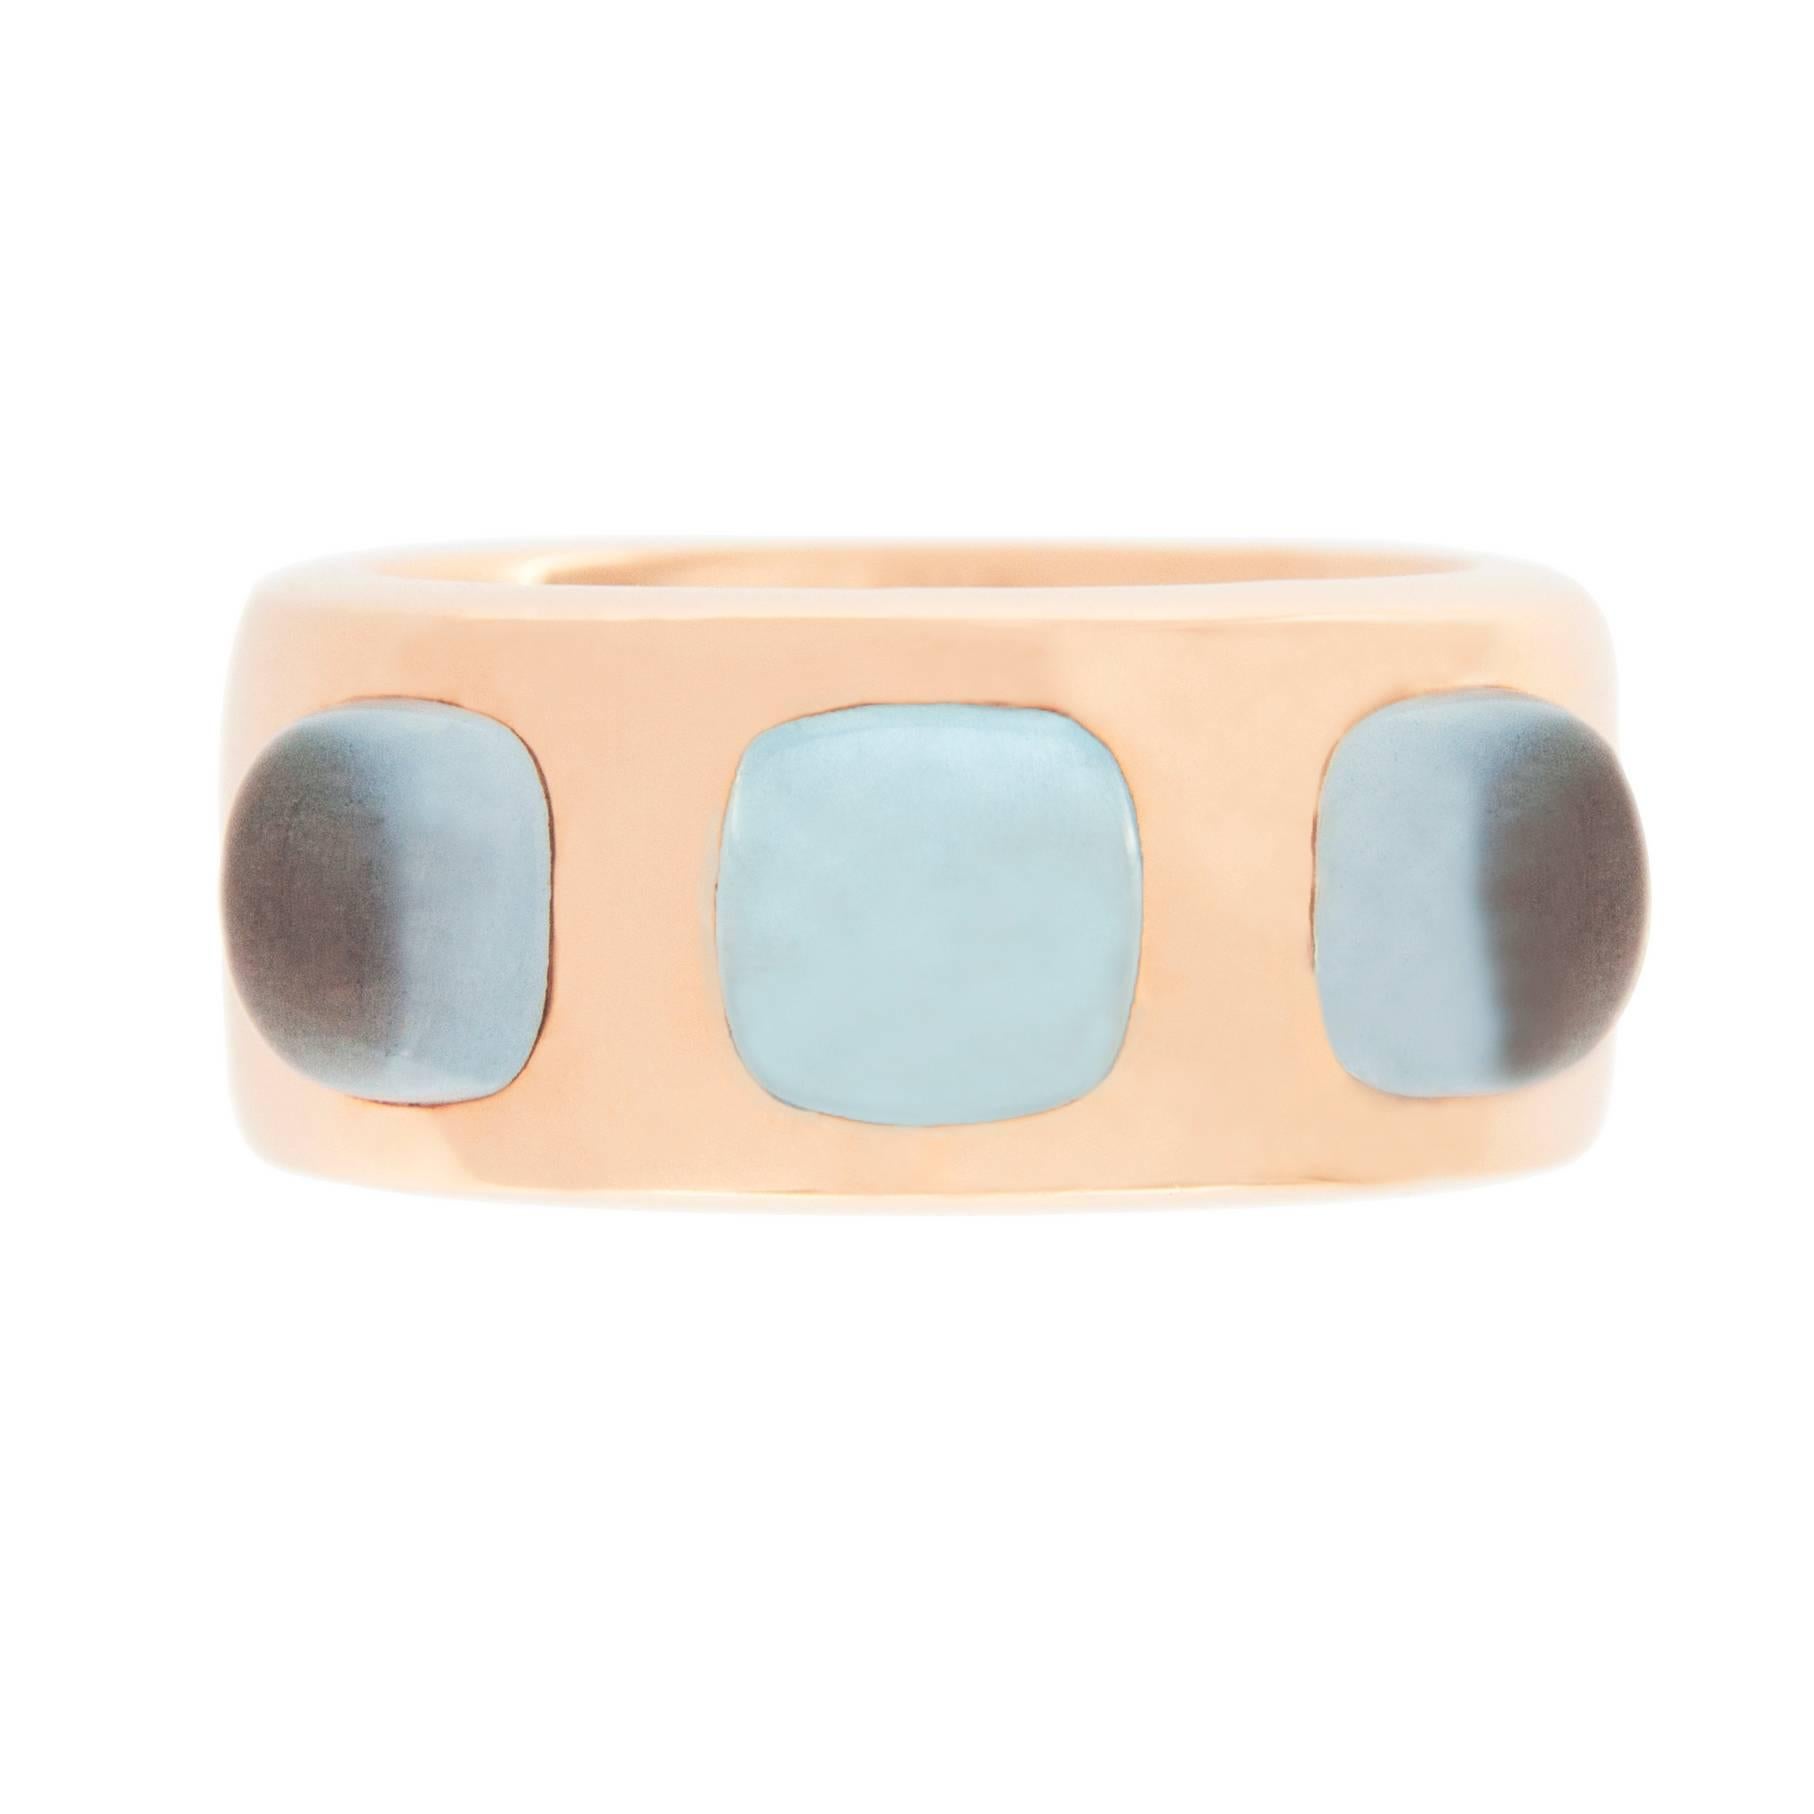 Jona design collection, hand crafted in Italy, 18 karat rose gold band ring set with three aquamarine cabochon weighing 4.2 carats in total. US size 6 / EU size 12. Can be sized to any specification.

Dimensions:
H 0.95 in. x W 0.84 in x D 0.36 in
H